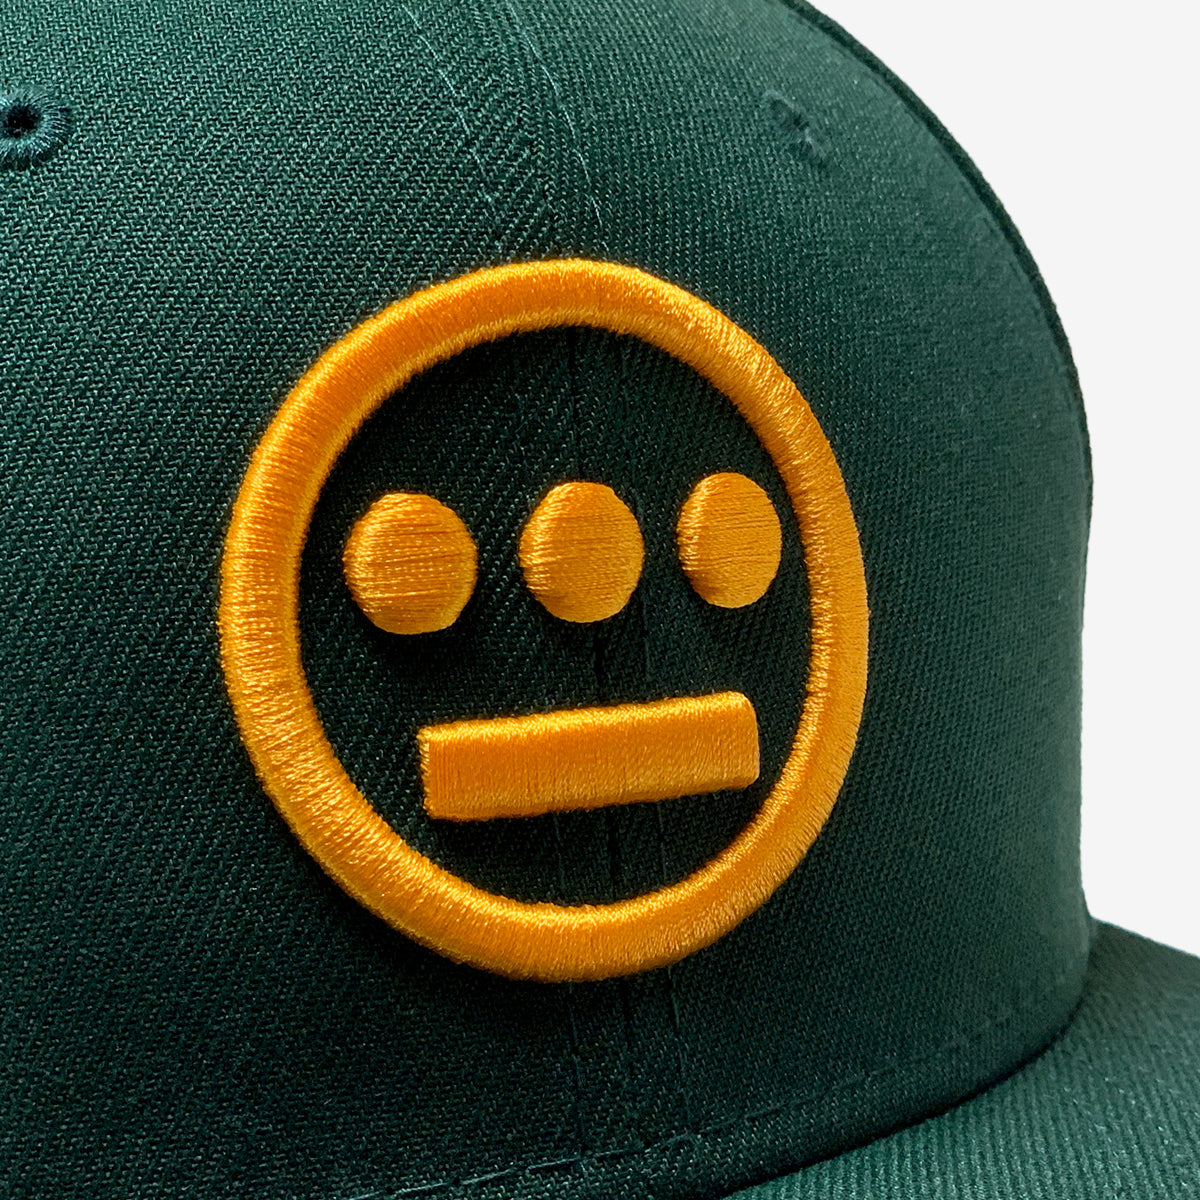 Close-up of gold embroidered Hieroglyphics hip-hop logo on the crown of a New Era cap.